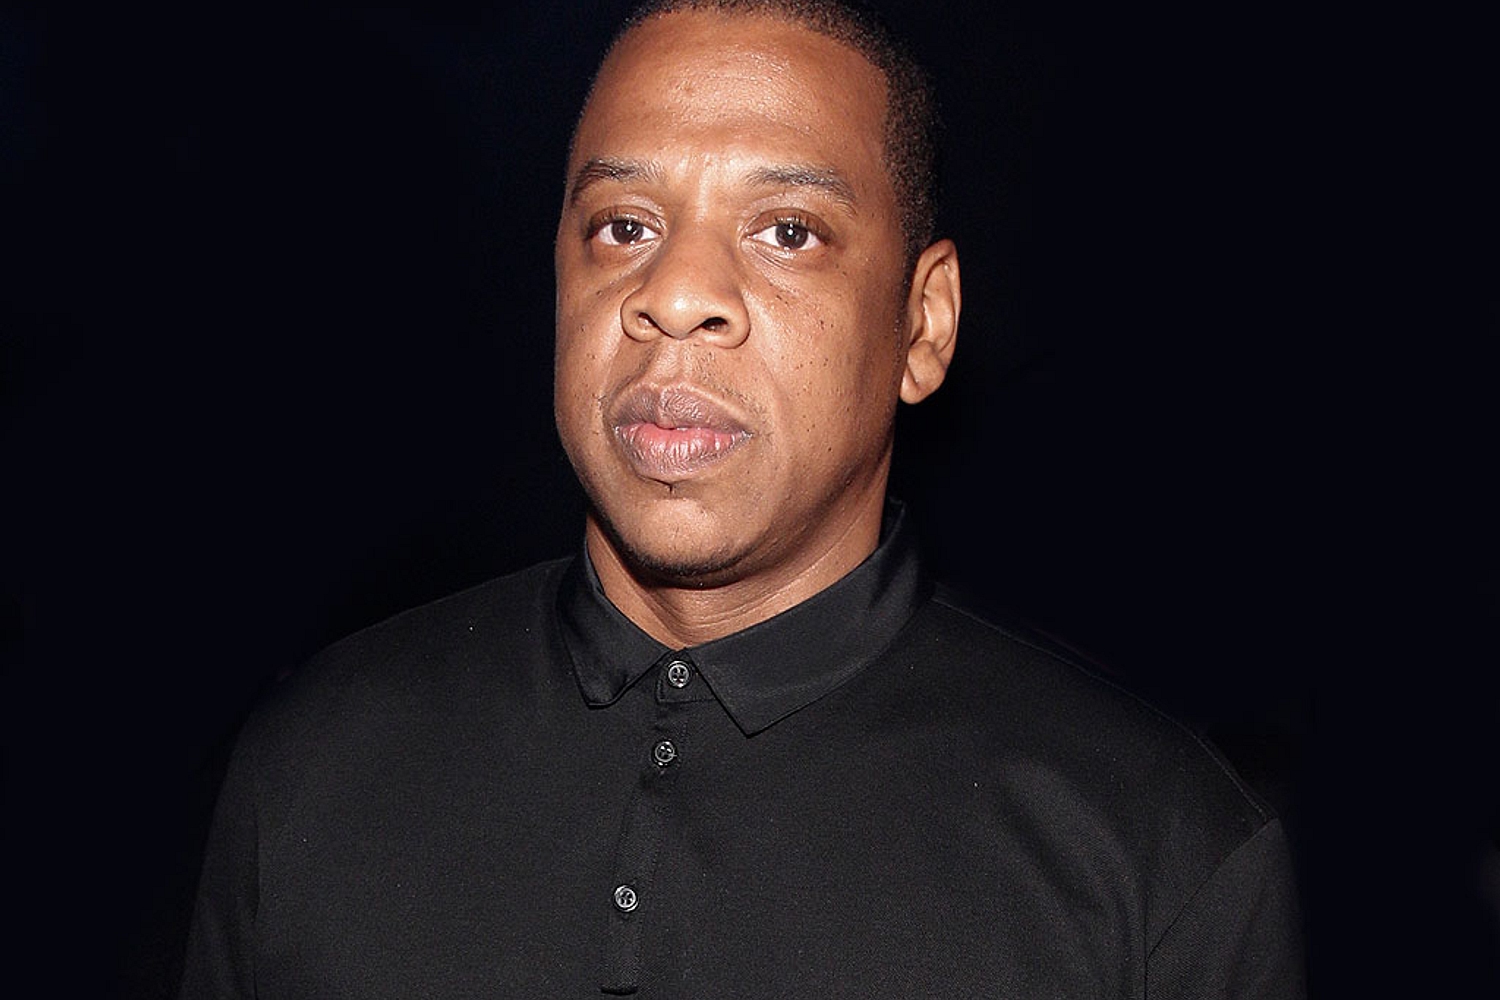 Jay Z is the next artist to announce a show in support of Hillary Clinton